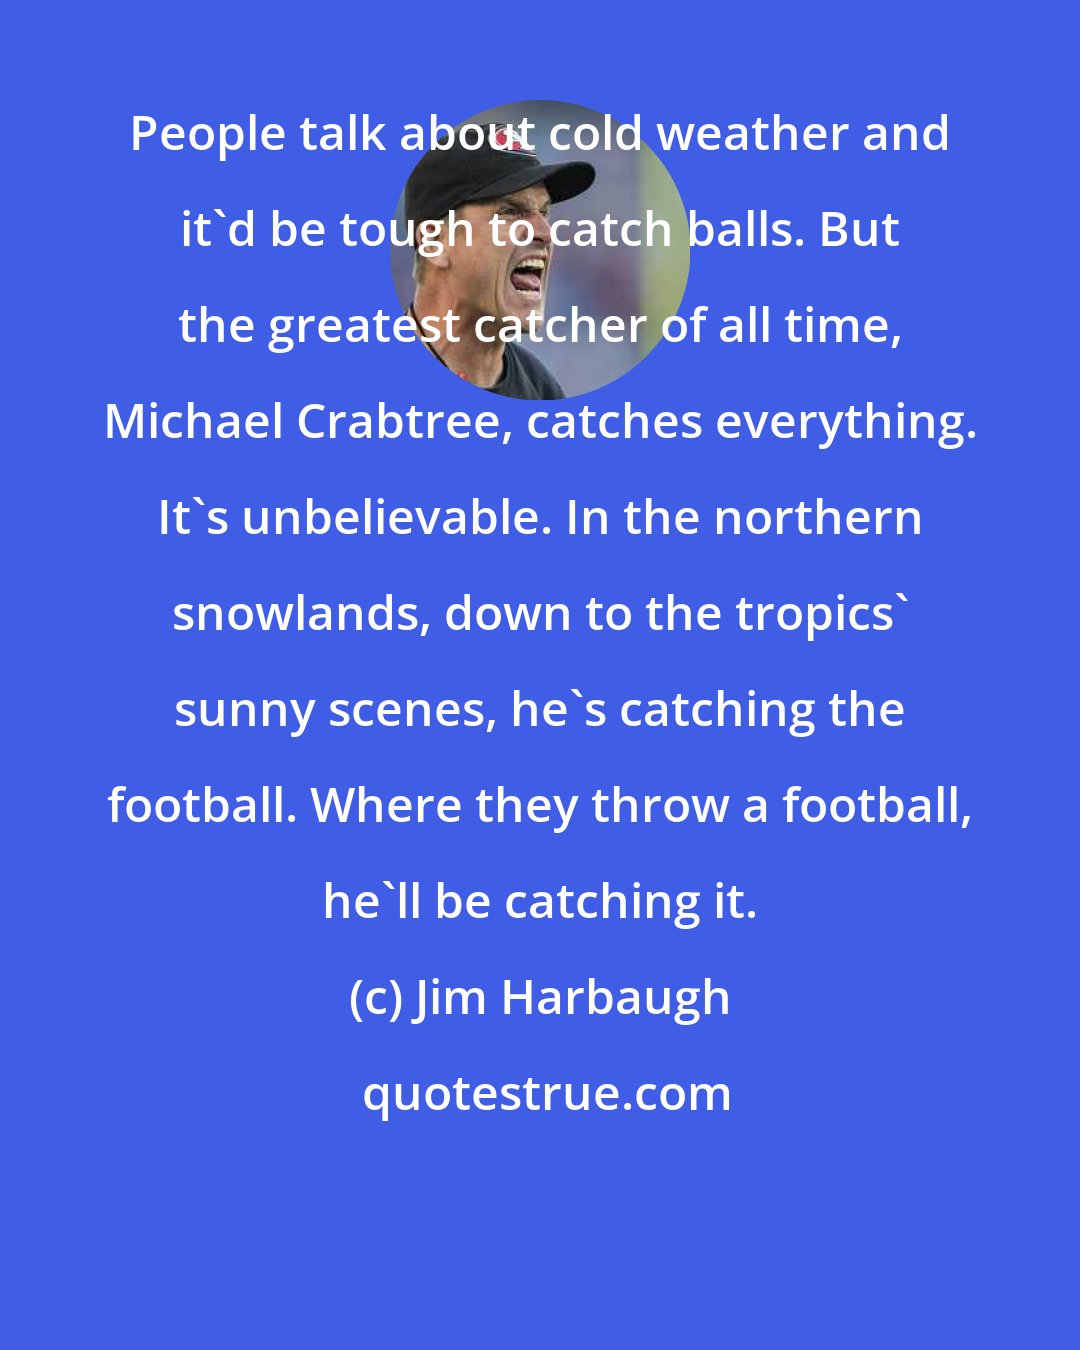 Jim Harbaugh: People talk about cold weather and it'd be tough to catch balls. But the greatest catcher of all time, Michael Crabtree, catches everything. It's unbelievable. In the northern snowlands, down to the tropics' sunny scenes, he's catching the football. Where they throw a football, he'll be catching it.